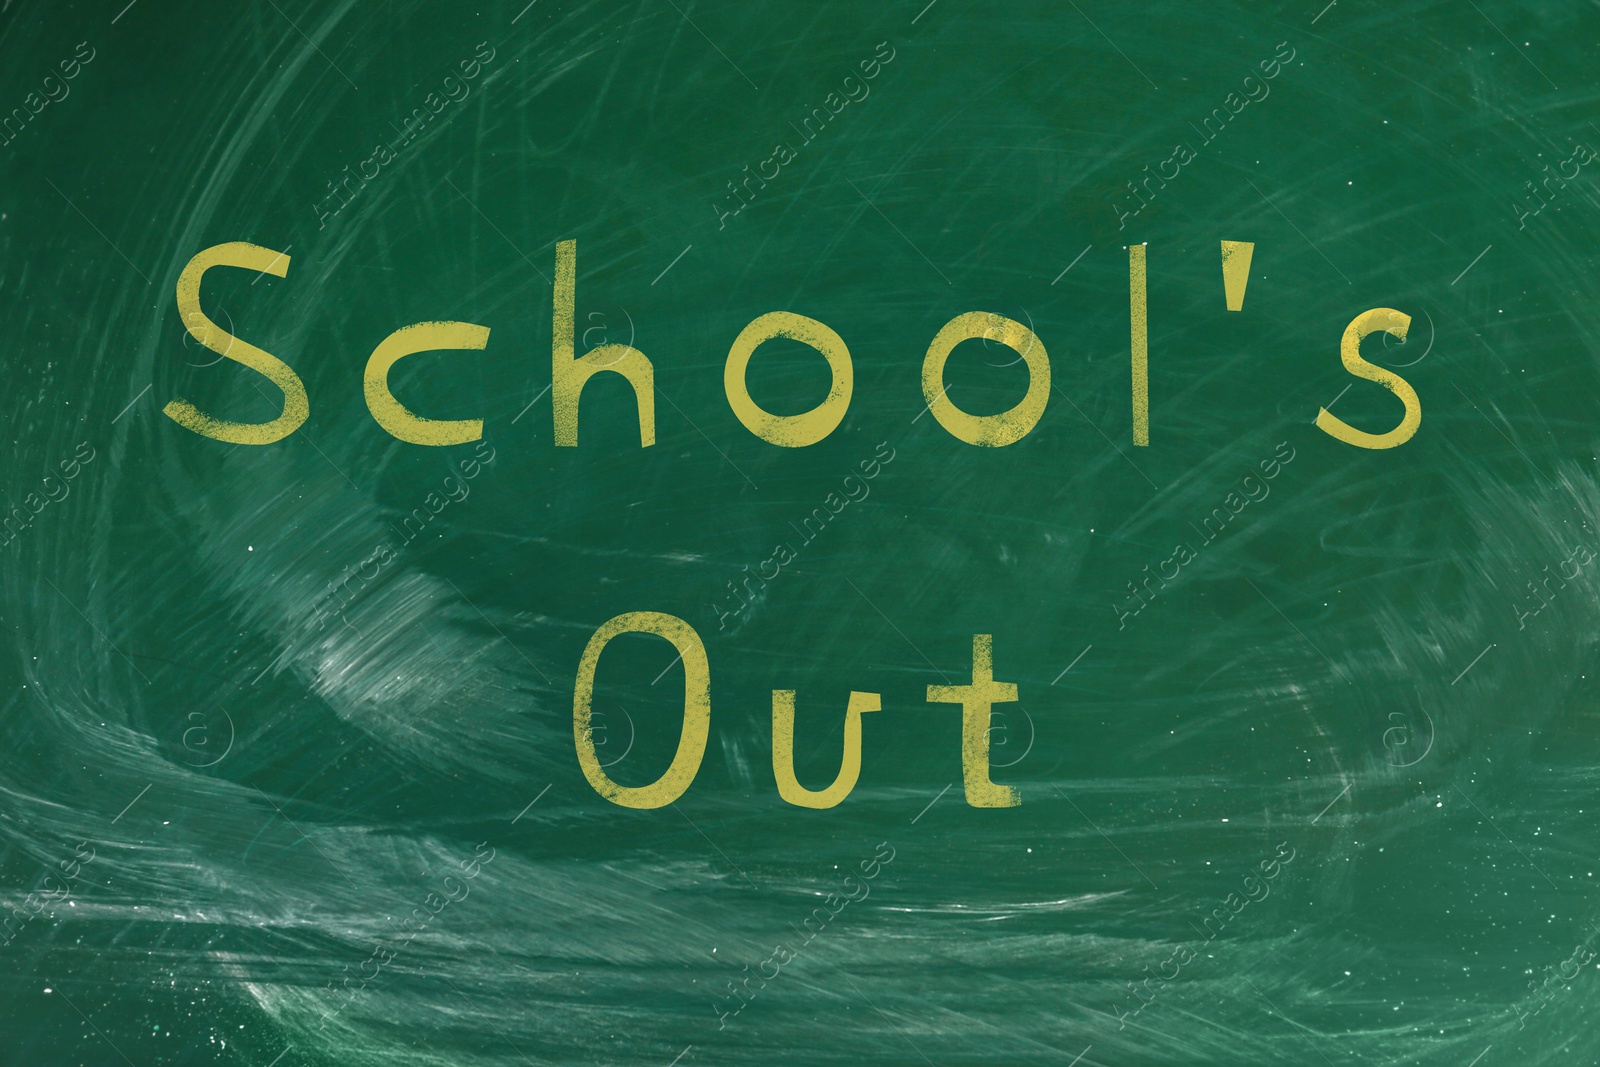 Image of Text SCHOOL'S OUT written on green chalkboard